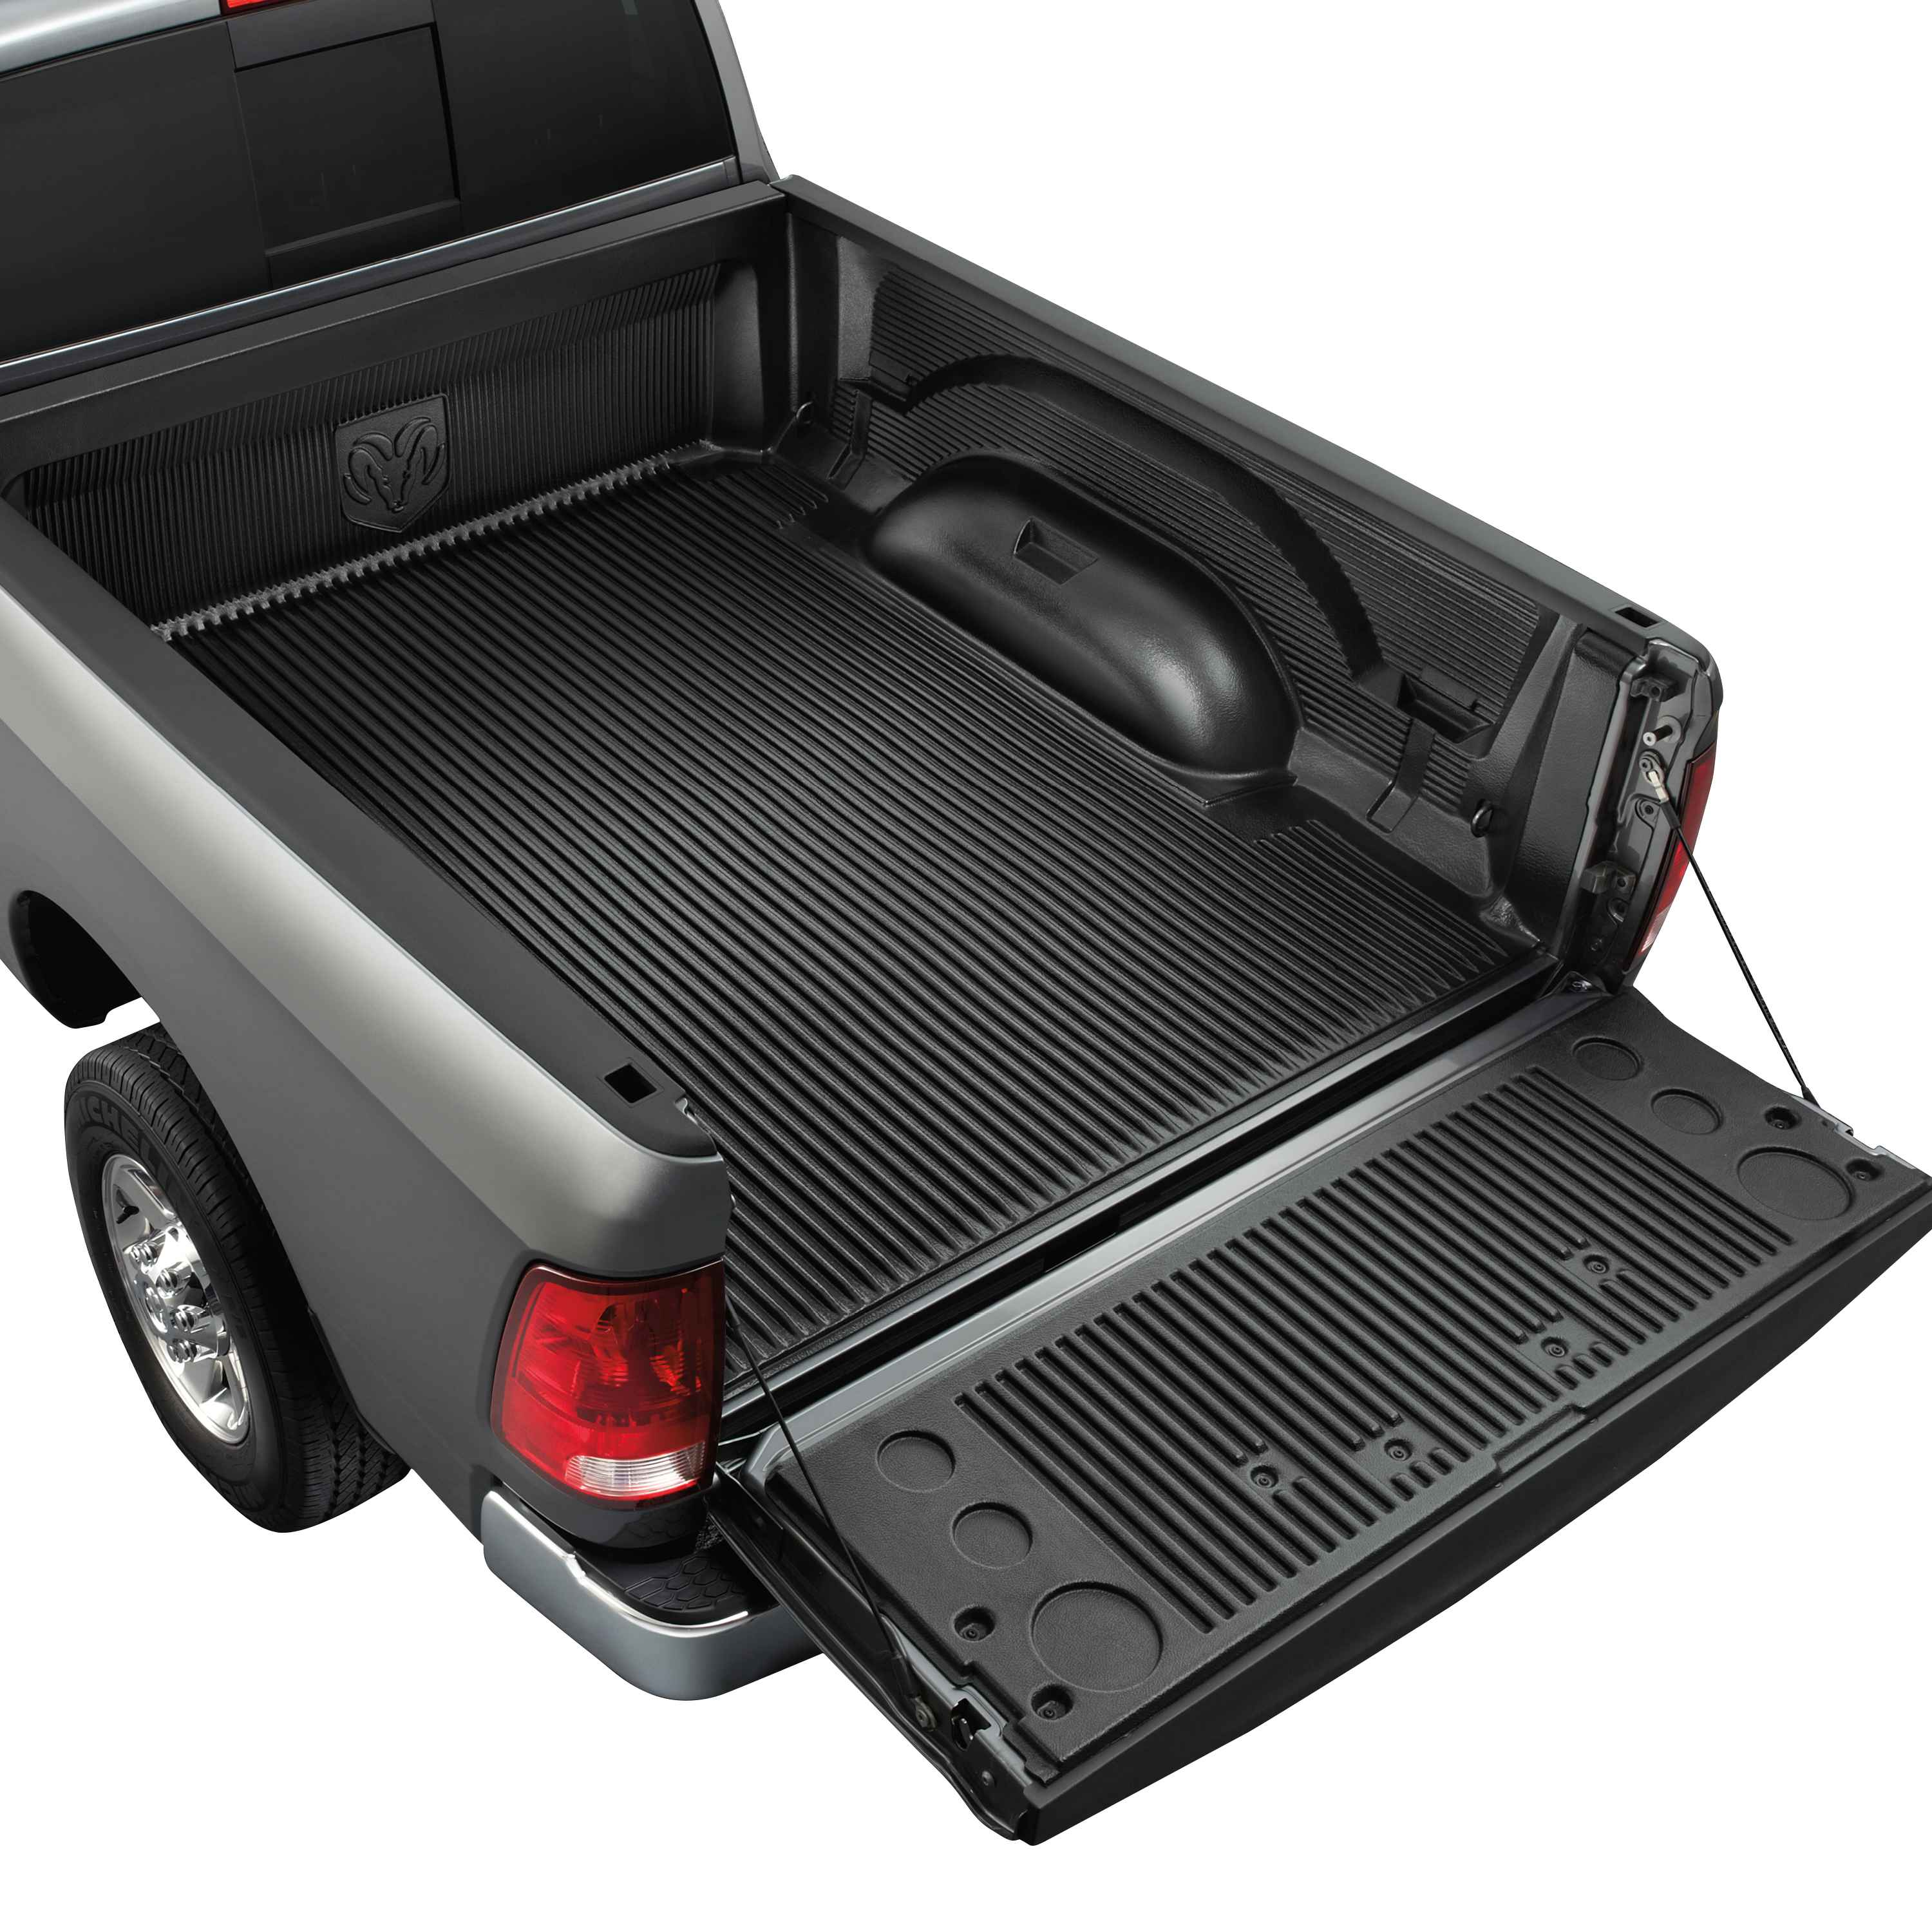 2017 RAM 3500 HD Drop-In Bedliner for 6.4 Conventional Bed 82214983AD